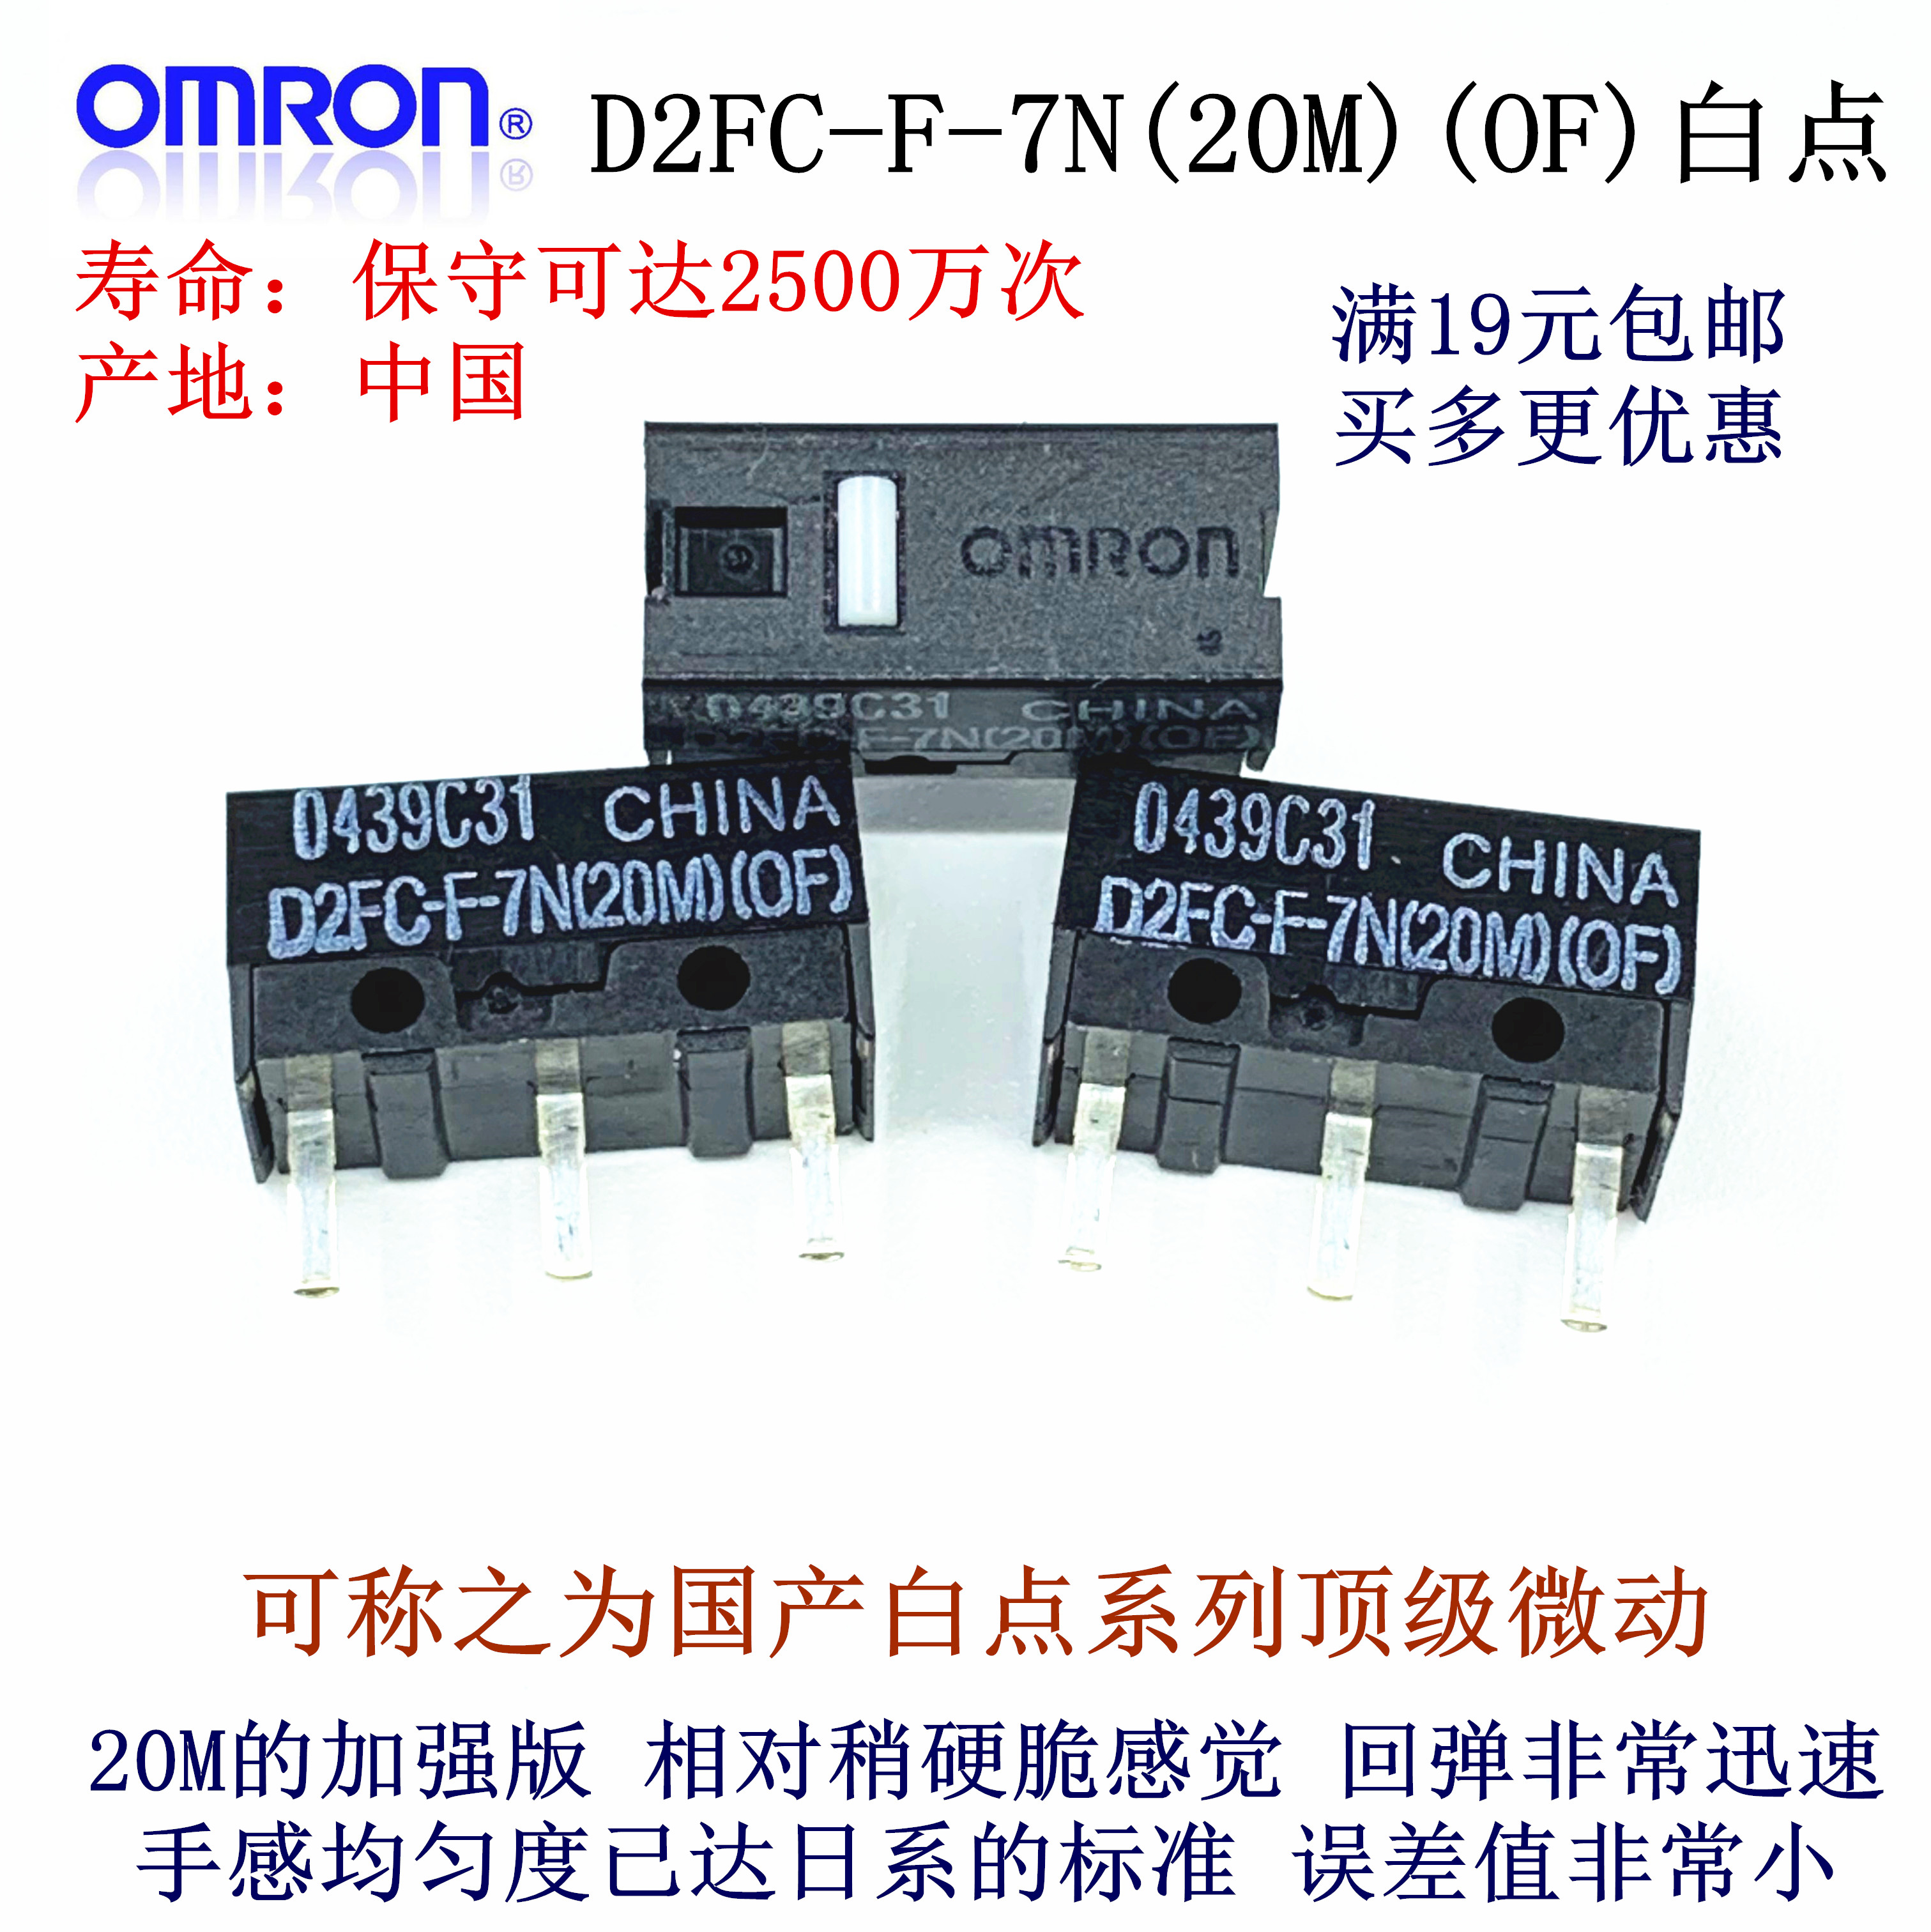 D2FC-F-7N(20M)(OF)brand new quality goods OMRON OMRON mouse Fretting Key switch D2FC-F-7N   10m20mOF   50M-RZ